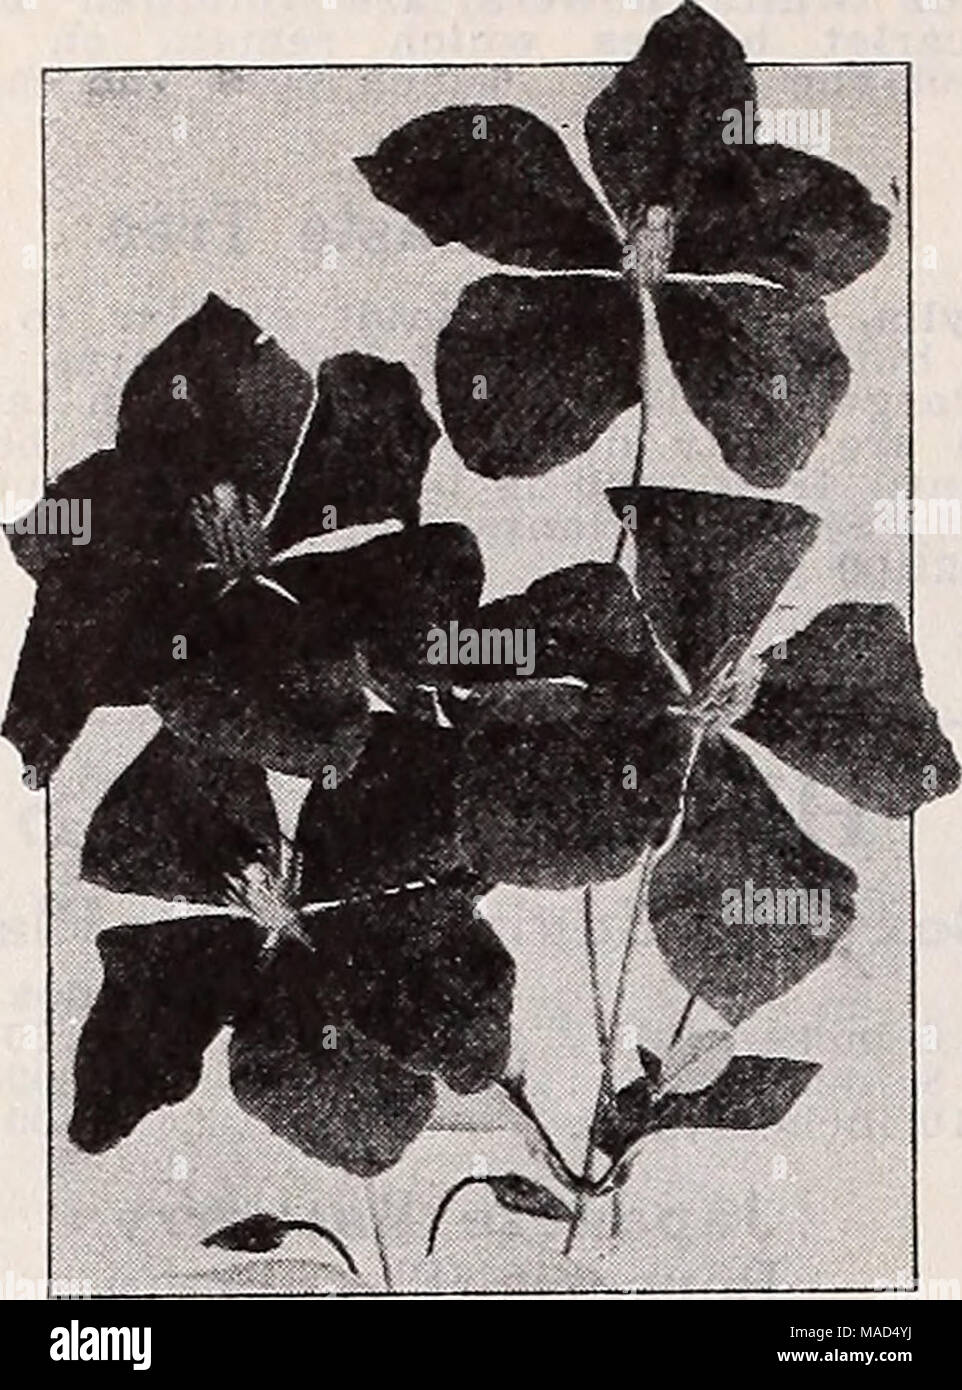 . Dreer's wholesale catalog for florists and market gardeners : 1939 winter spring summer . Clematis Jackmani Large Flowering Clematis Duchess of Edinburgh. Double white. Henryi, Large single creamy white. Jackmani. Rich purple. Mine. Edouard Andre. Carmine. Two-year-old plants: GOc each. Euonymus Per doz. Per 100 Kadicans acutus coloratus. A strong growing variety, with long narrow dark green leaves tinted purplish red, particularly on the under side. 4-inch pots $3 00 $20 00 — variegatus. Good plants of this useful variegated-leaved form. 4-inch pots.. 3 00 20 00 — vegetus (Evergreen Bitters Stock Photo